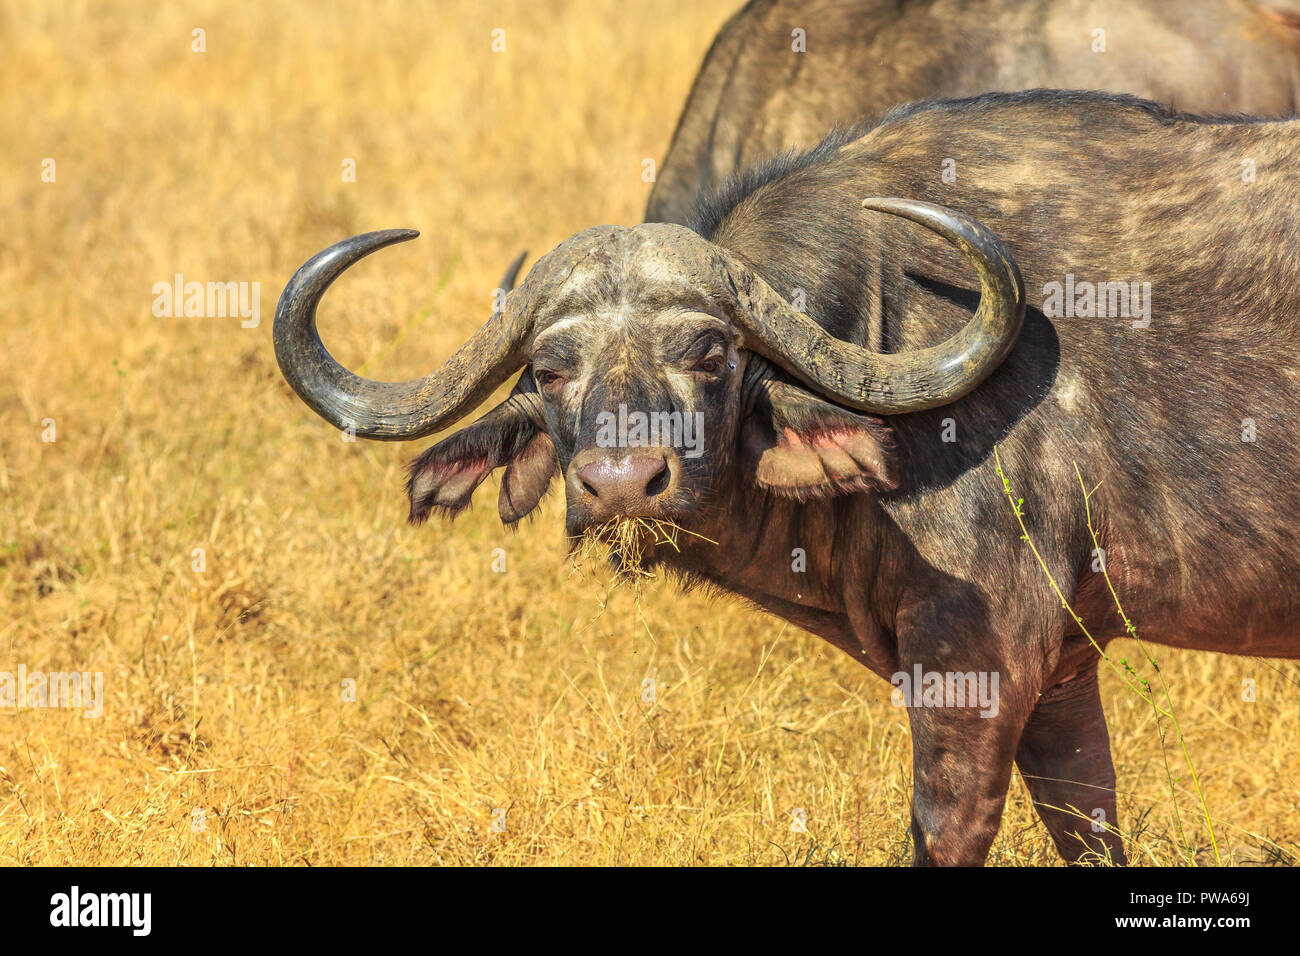 Closeup of face of African buffalo, Syncerus caffer, in grassland nature, dry season. Kruger National Park in South Africa. The Cape buffalo is a large African bovine part of popular Big Five. Stock Photo